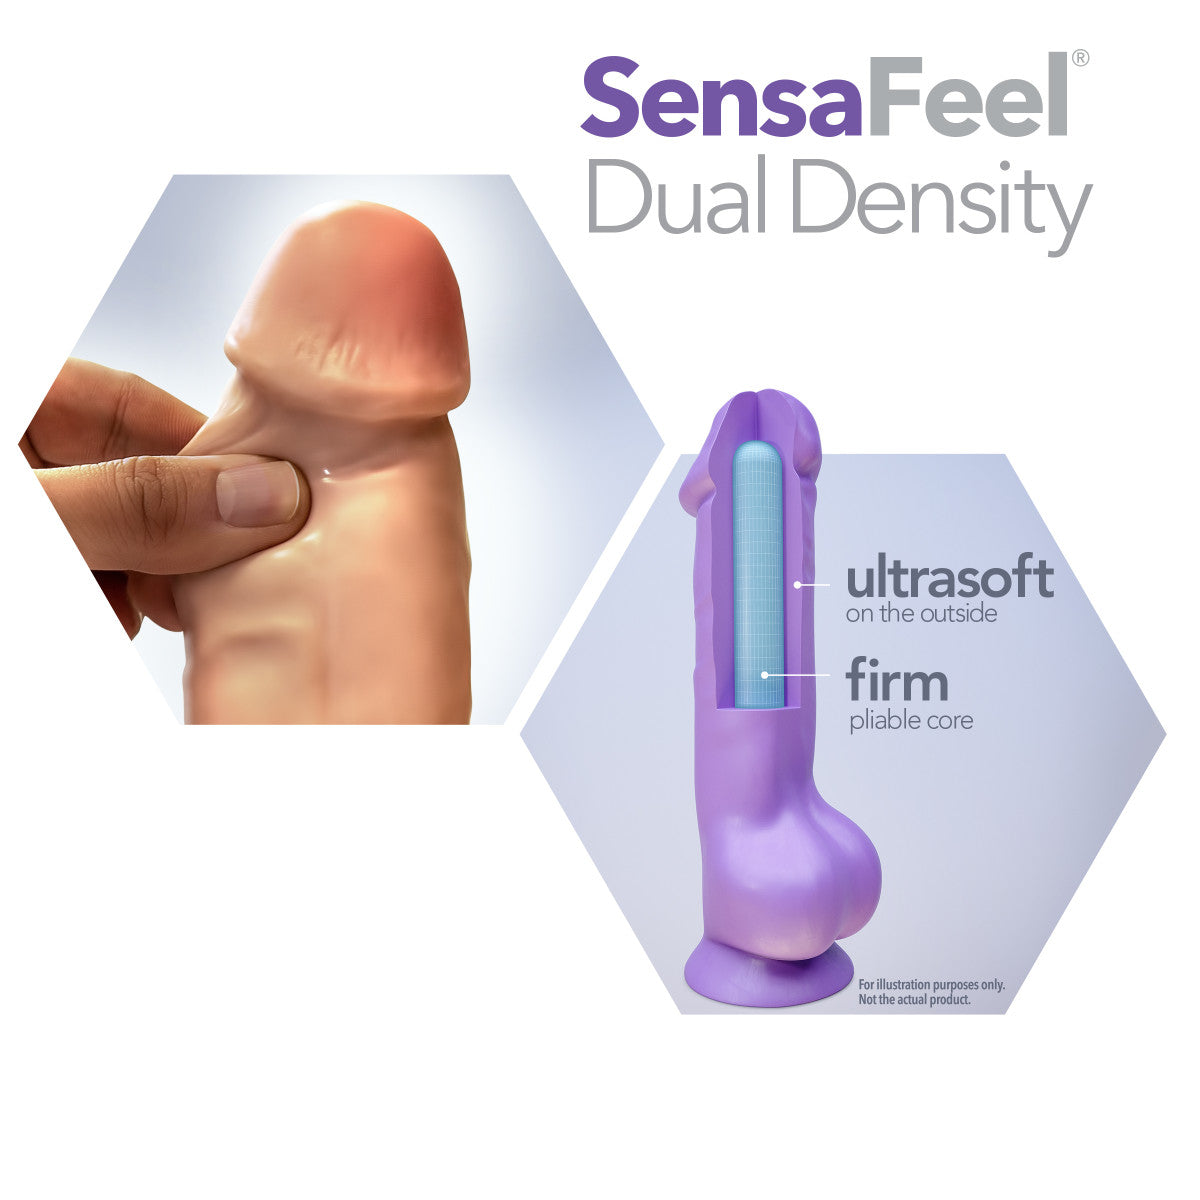 Vanilla skin tone ultra realistic dildo with a tapered realistic head for easy insertion and veins along the straight but flexible shaft. Head is slightly tinted in a blush color for a lifelike look. Realistic balls. Suction cup base. Additional images show alternate angles.